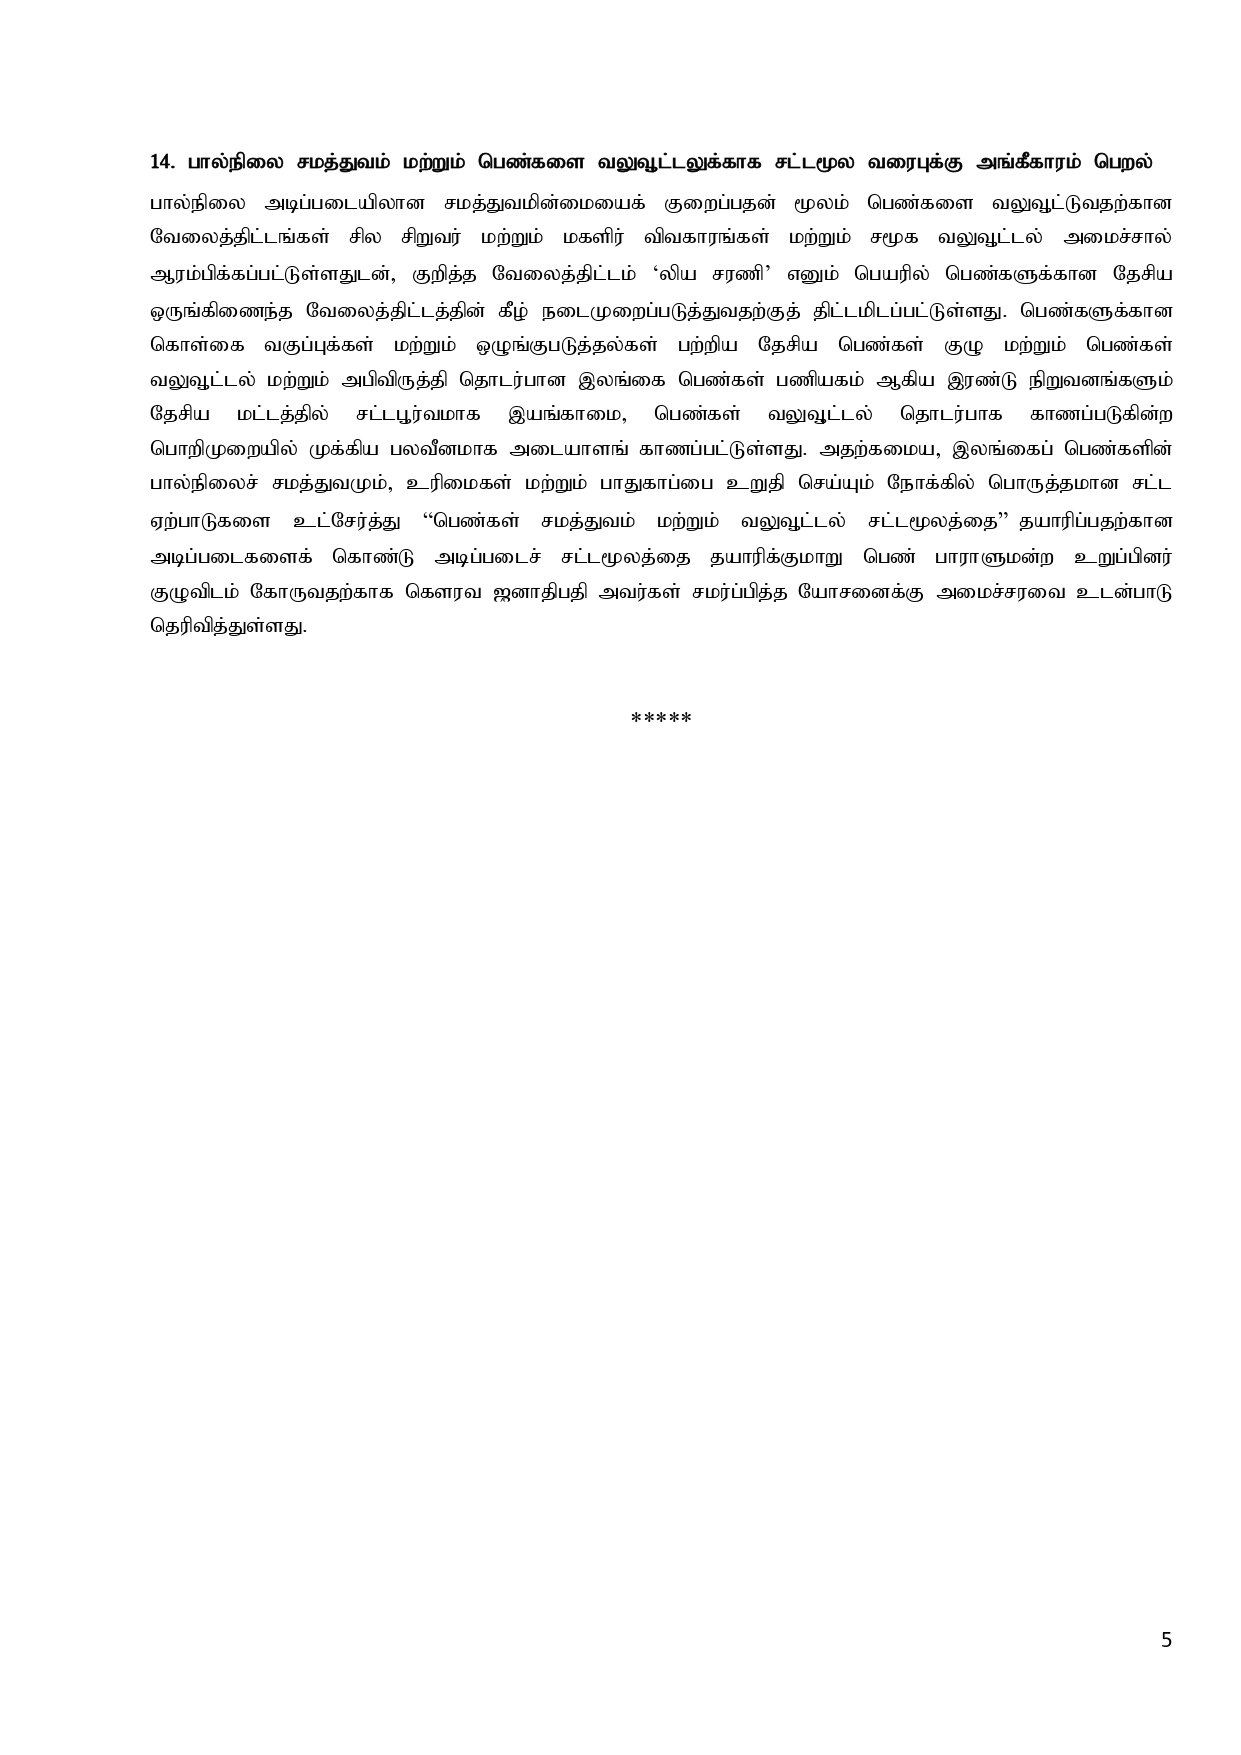 Cabinet Decisions on 05.09.2022 Tamil page 0005